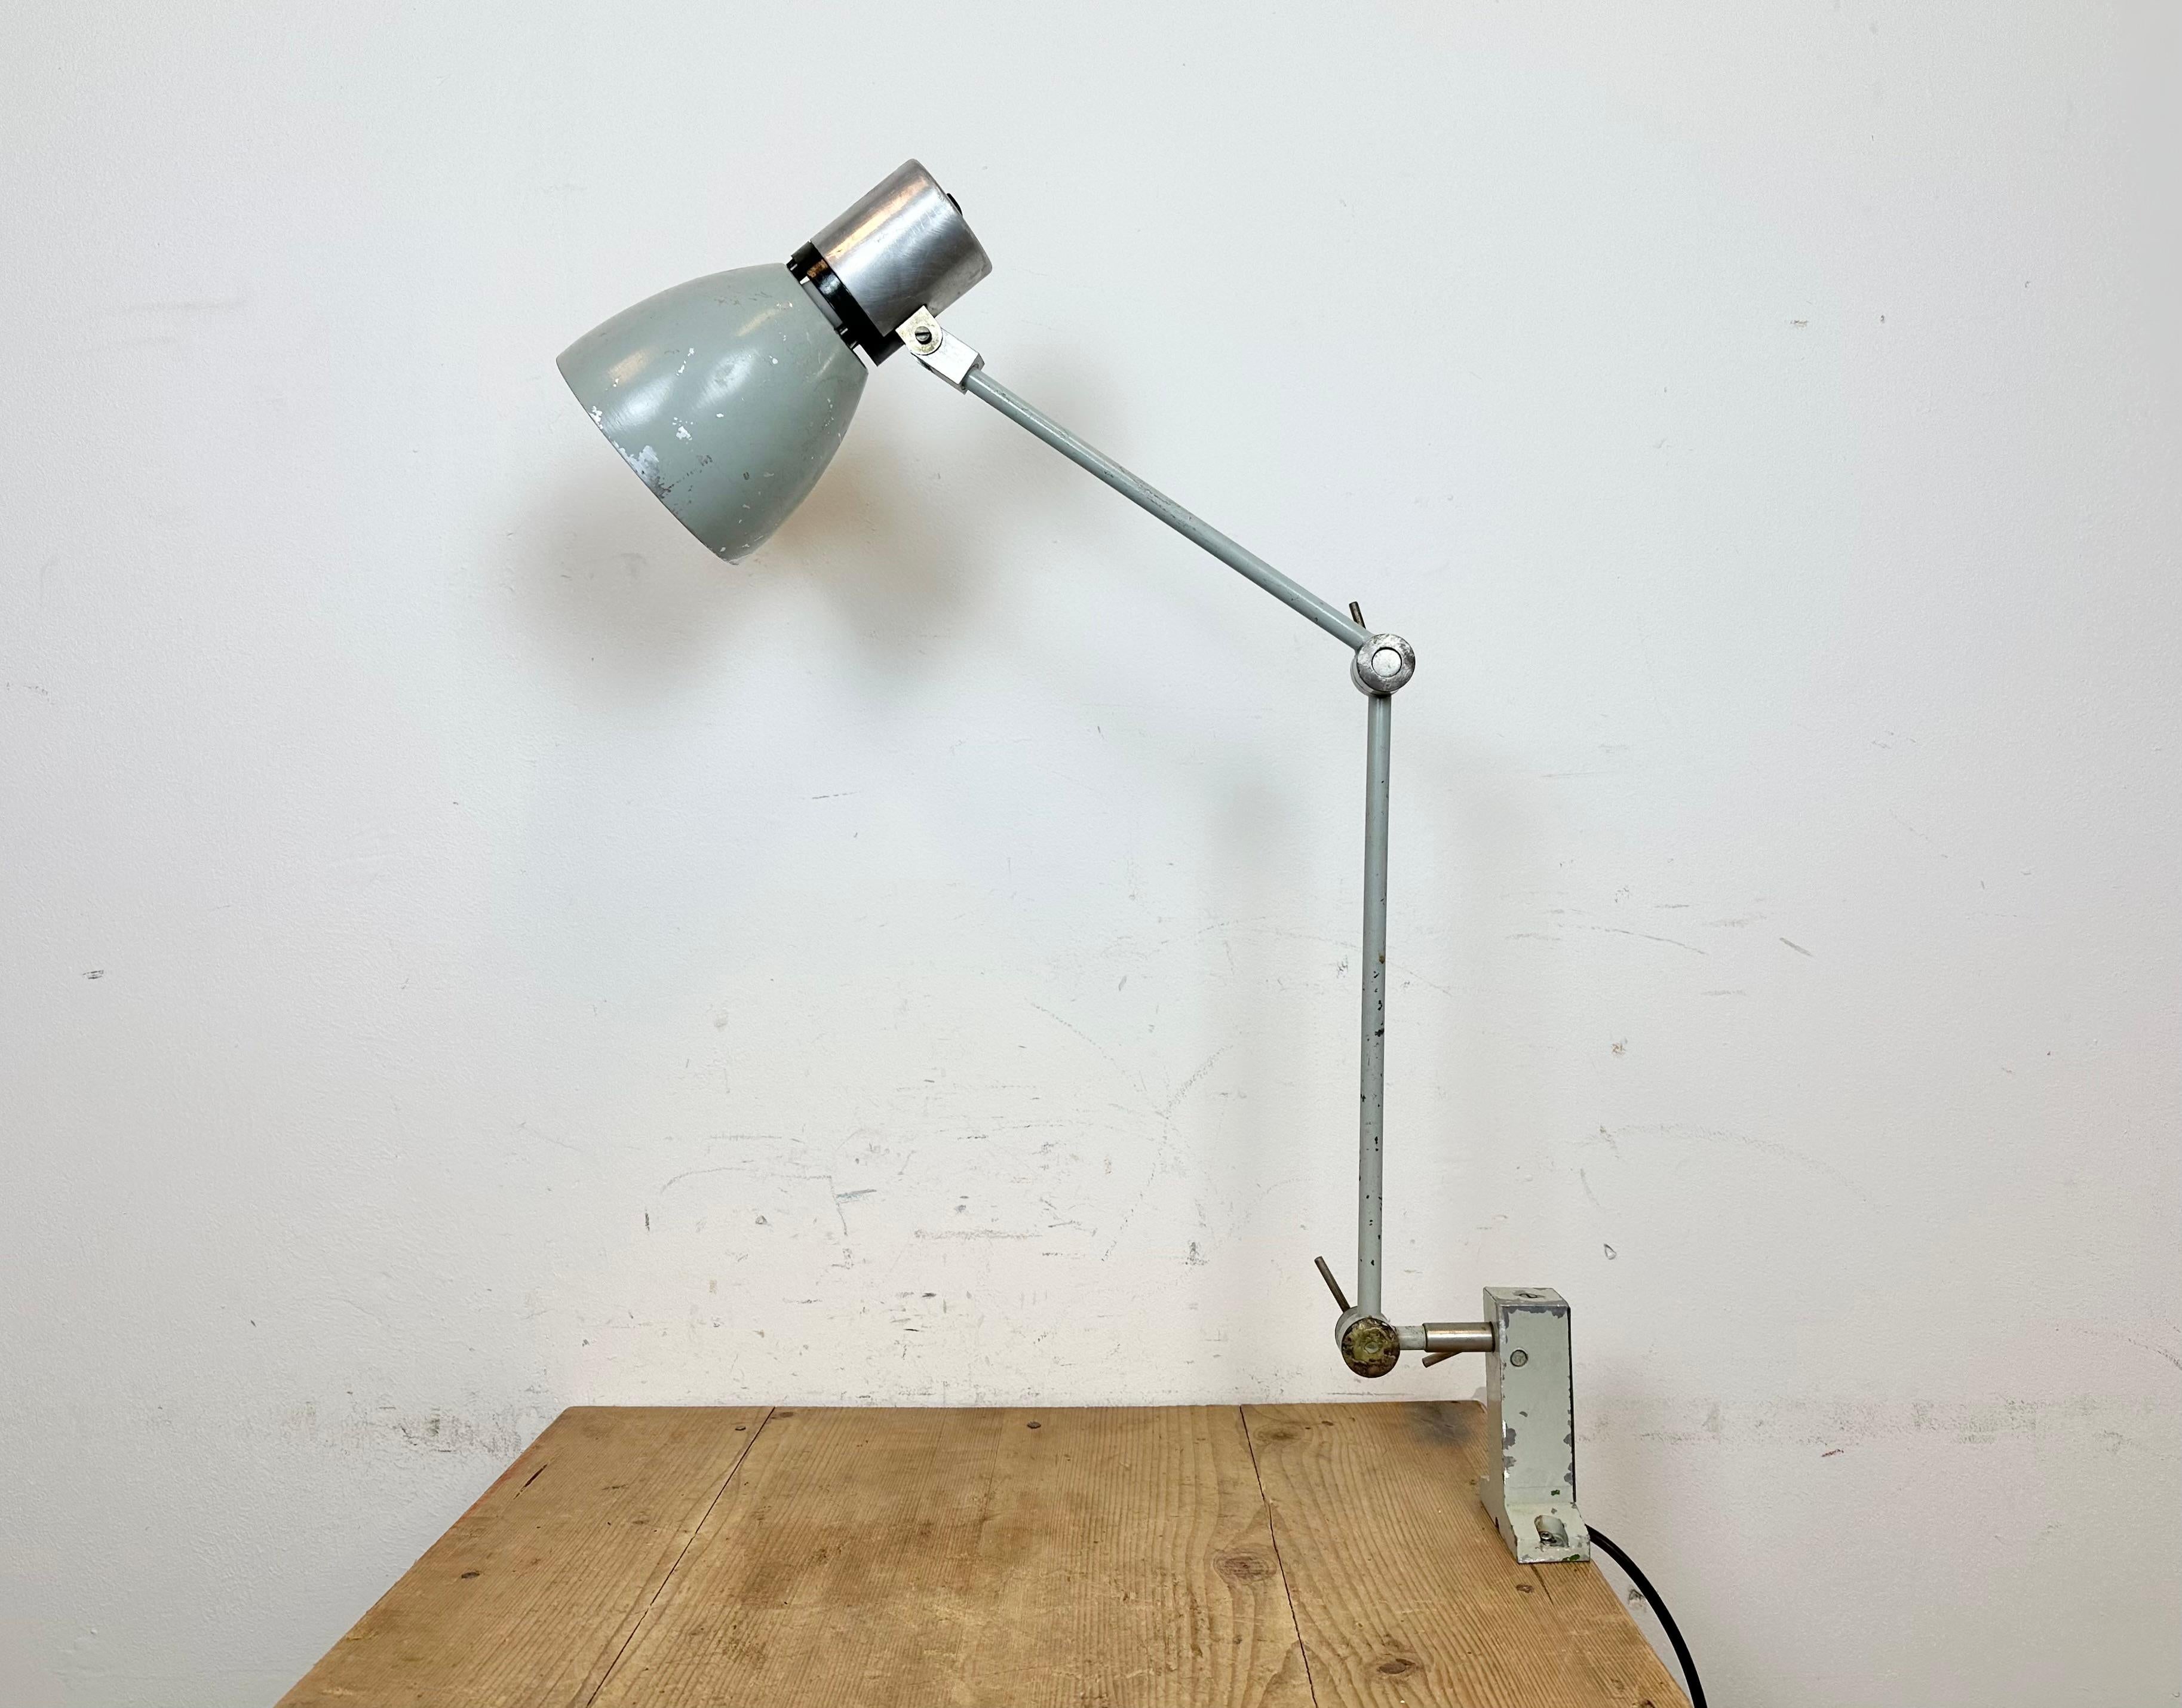 Industrial table lamp made by Elektrosvit in former Czechoslovakia during the 1970s. It features an iron base, an iron arm with three adjustable joints and aluminium shade with original switch on the top. The socket requires standard E 27 / E26